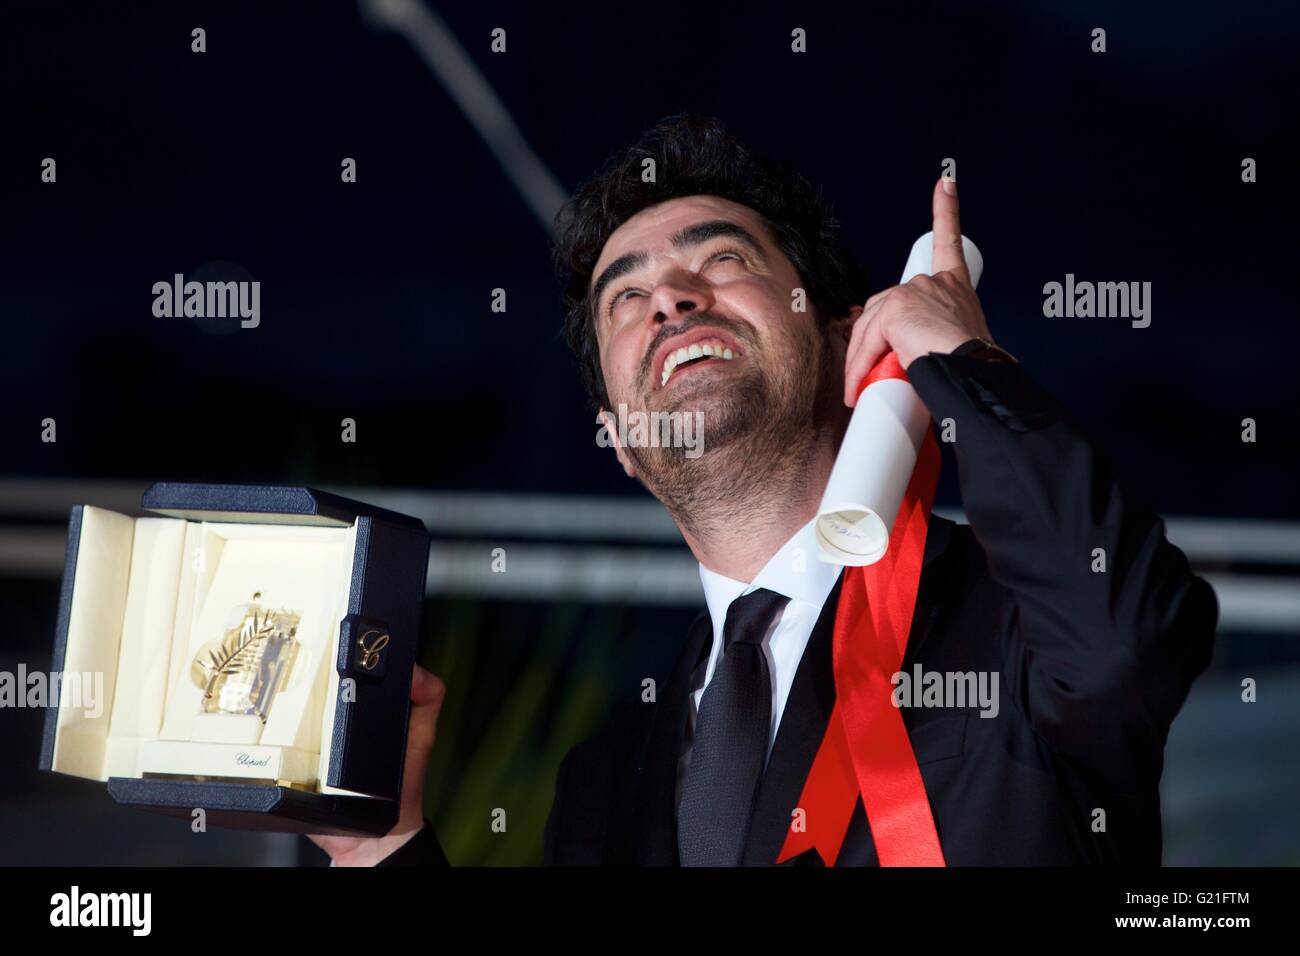 Cannes, France. 22nd May, 2016. Actor Shahab Hosseini, Best Actor Award winner for his role in the film "Forushande" (The Salesman), poses during a photocall after the closing ceremony of the 69th Cannes Film Festival in Cannes, France, May 22, 2016. Credit:  Jin Yu/Xinhua/Alamy Live News Stock Photo